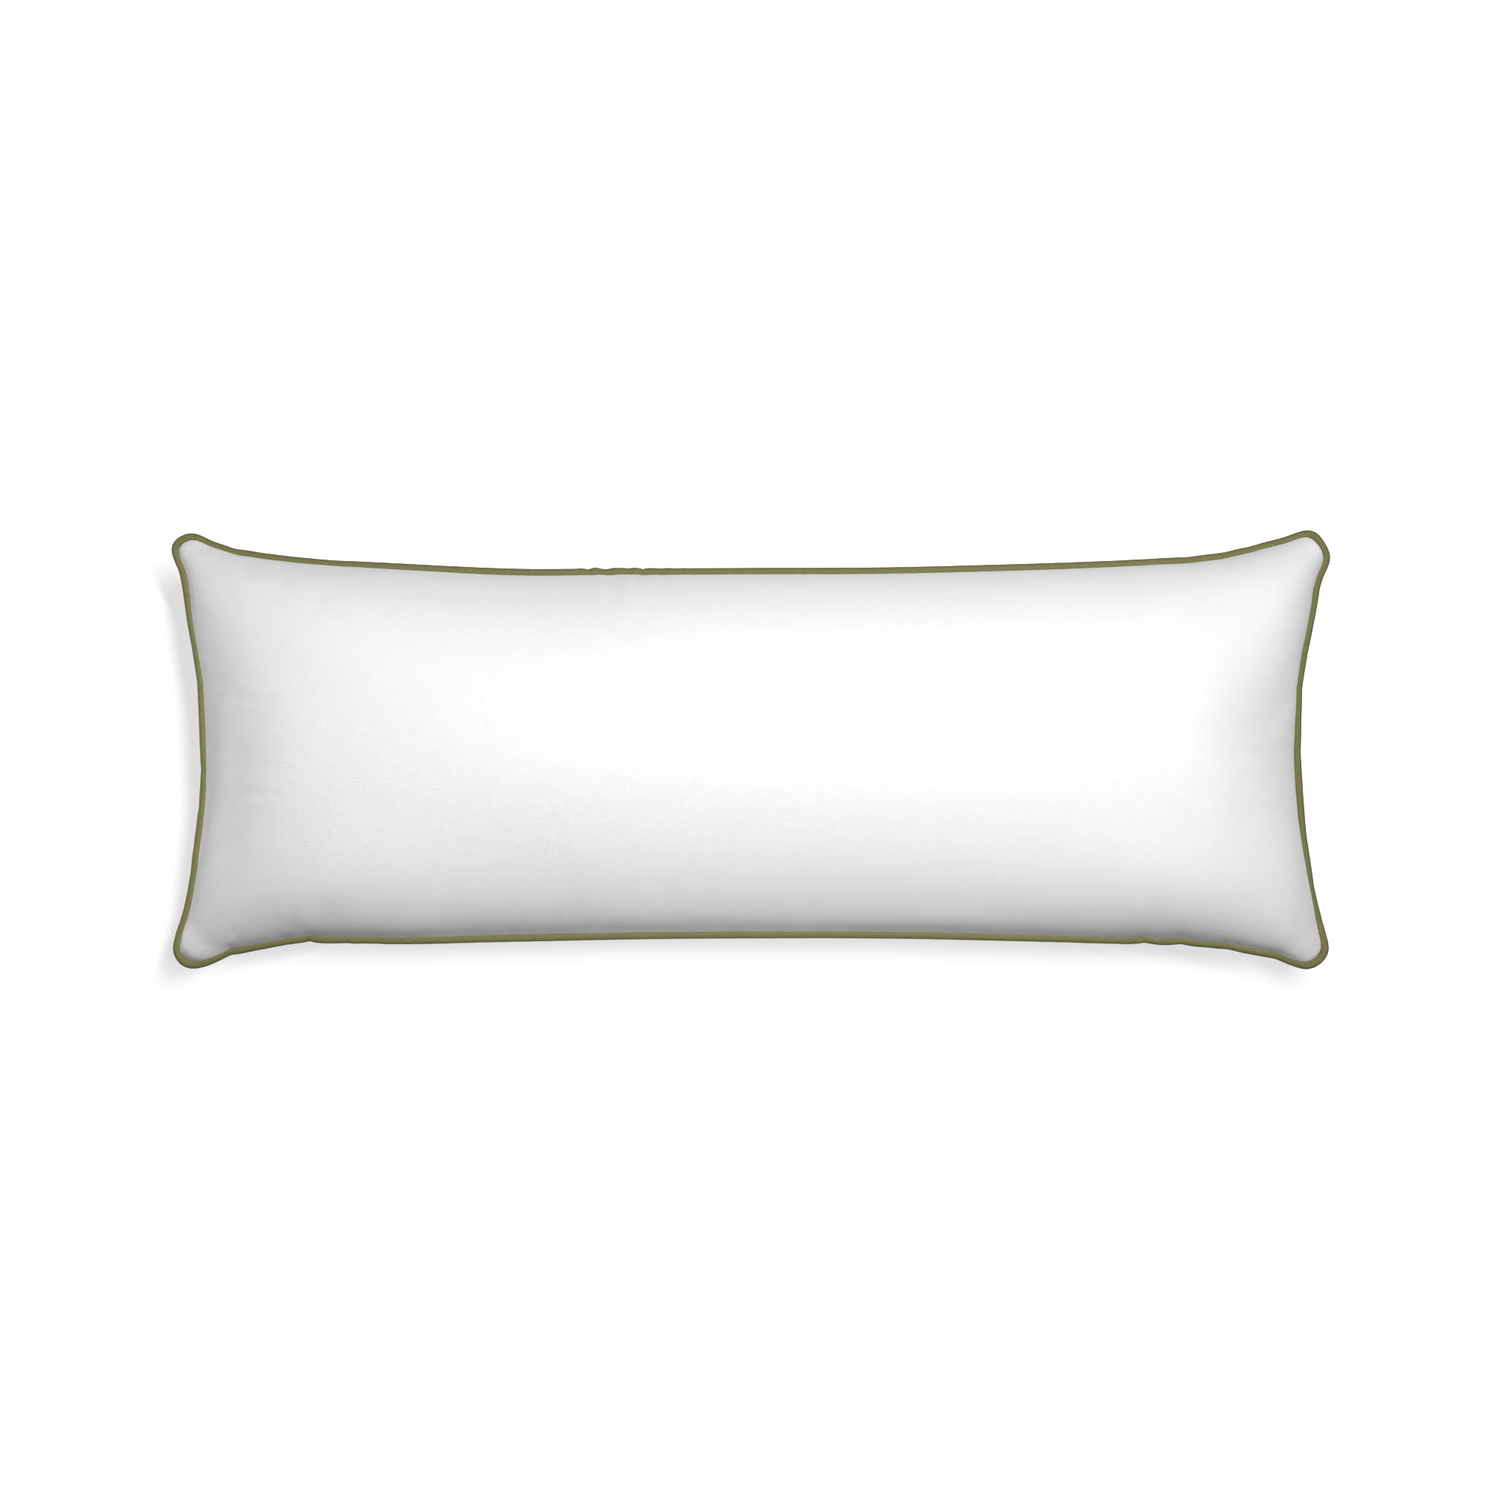 Xl-lumbar snow custom pillow with moss piping on white background